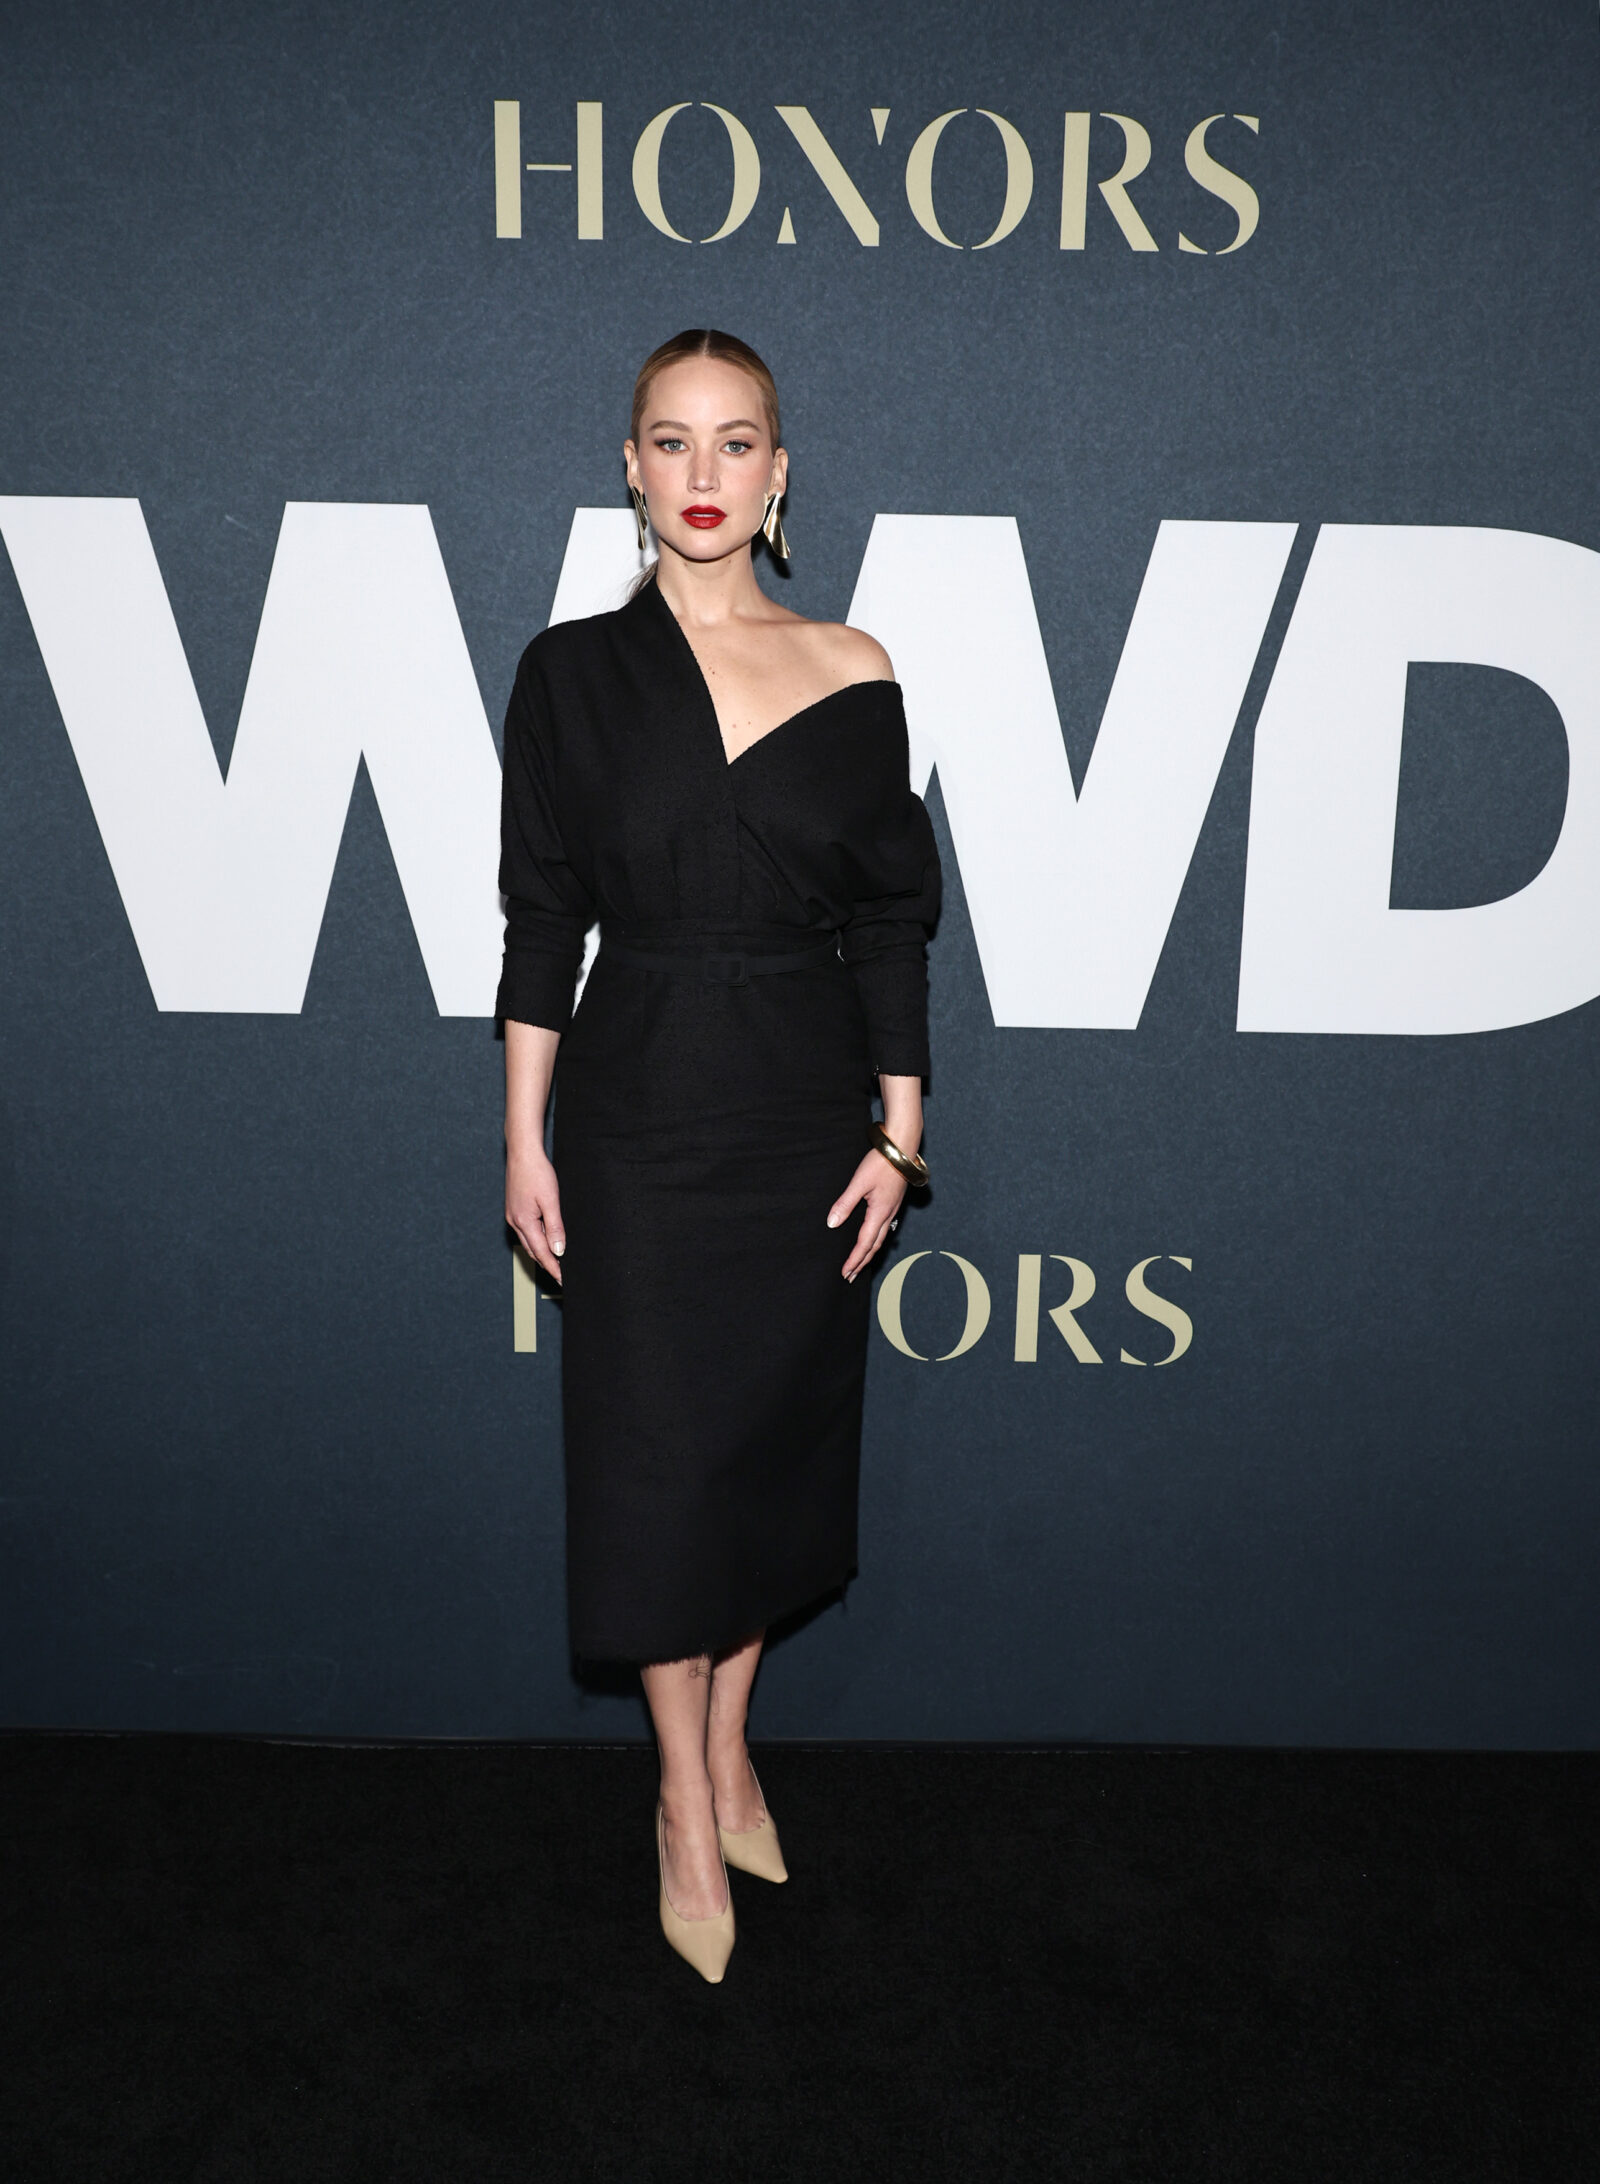 Jennifer Lawrence exudes sophistication in a sleek black Dior ensemble at the WWD Honors event.